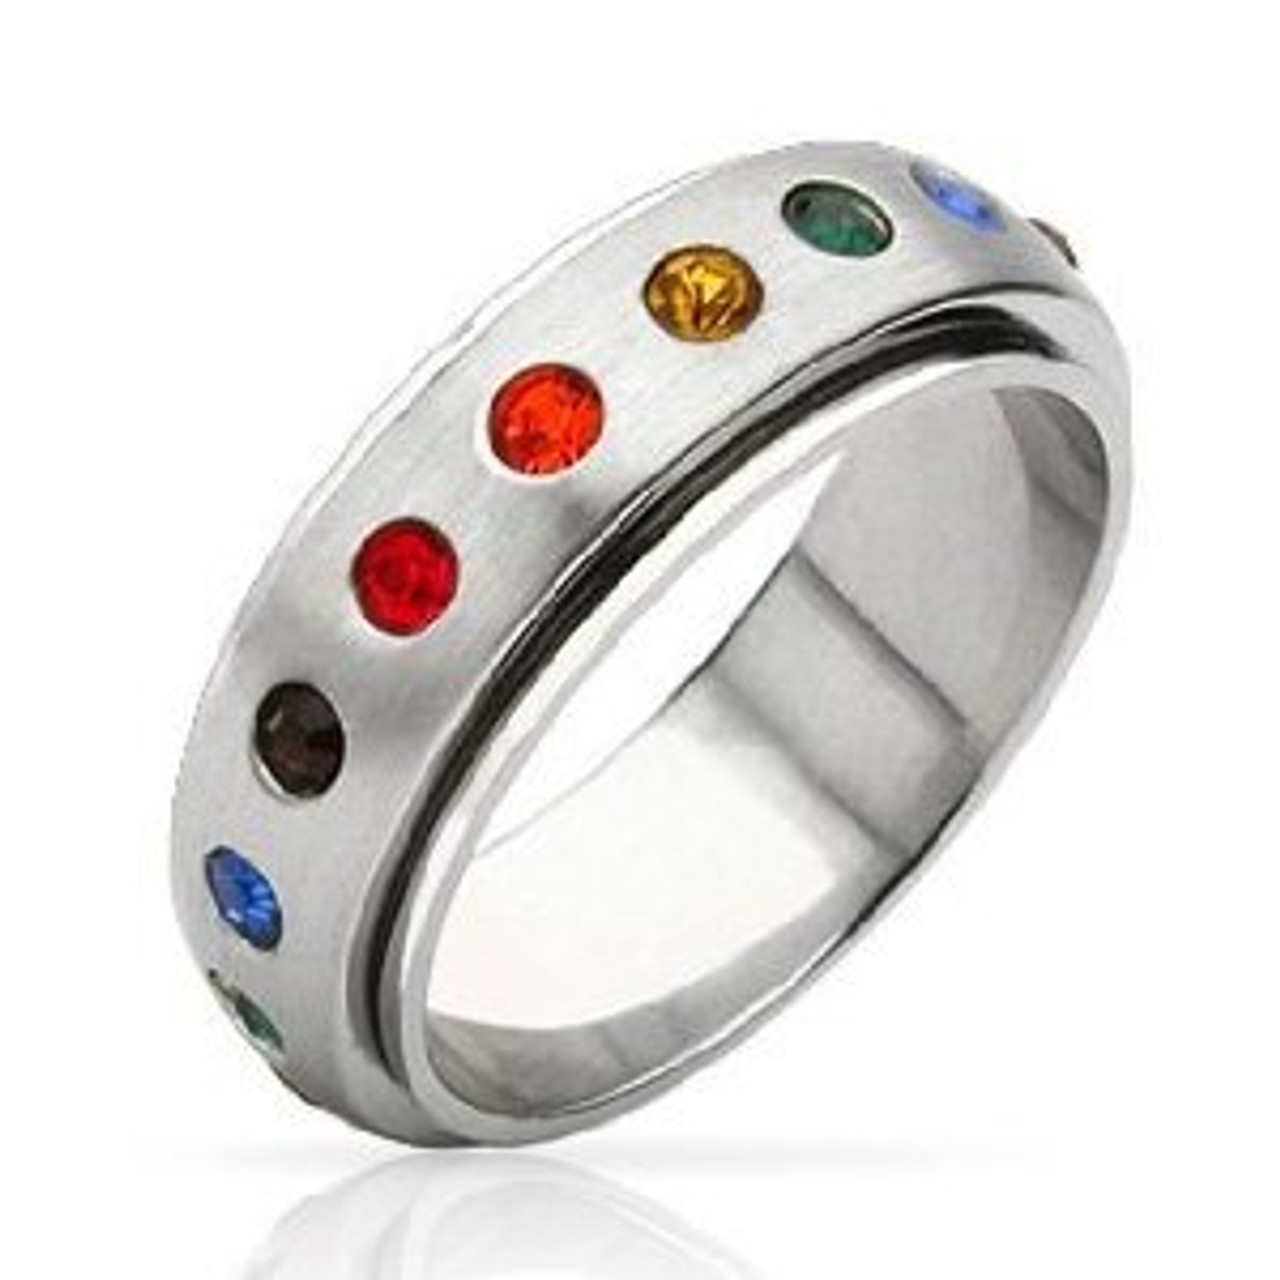 Rainbow Spinner Ring - Gay & Lesbian Pride Stainless Steel Ring w/ CZ Stones - rainbow ring, pride spinner rings, gay spinner rings, lesbian spinner srings, 